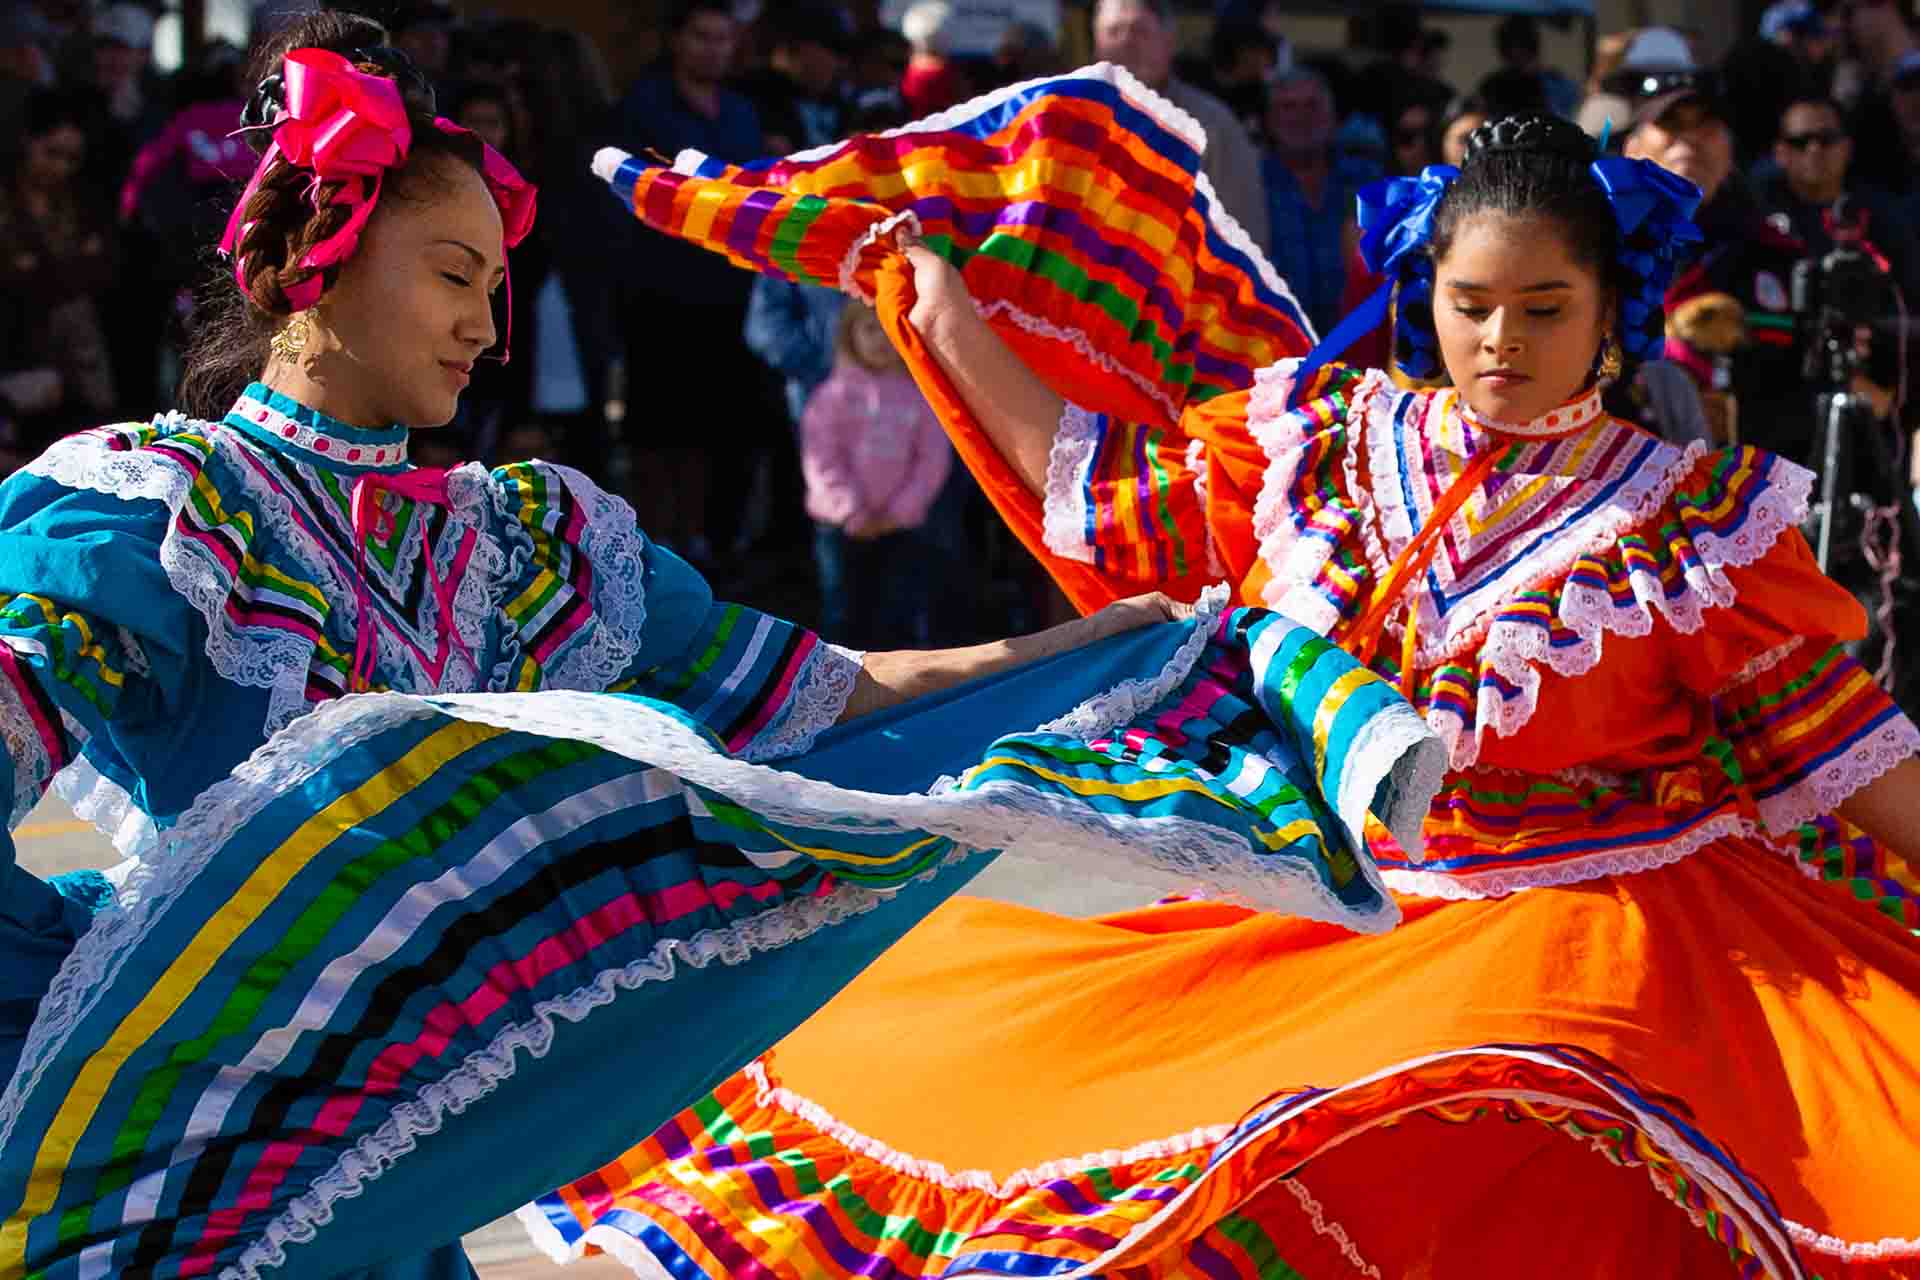 Image of two folkloric dancers in bright colored dresses, with full flowing skirts rippling as they dance.